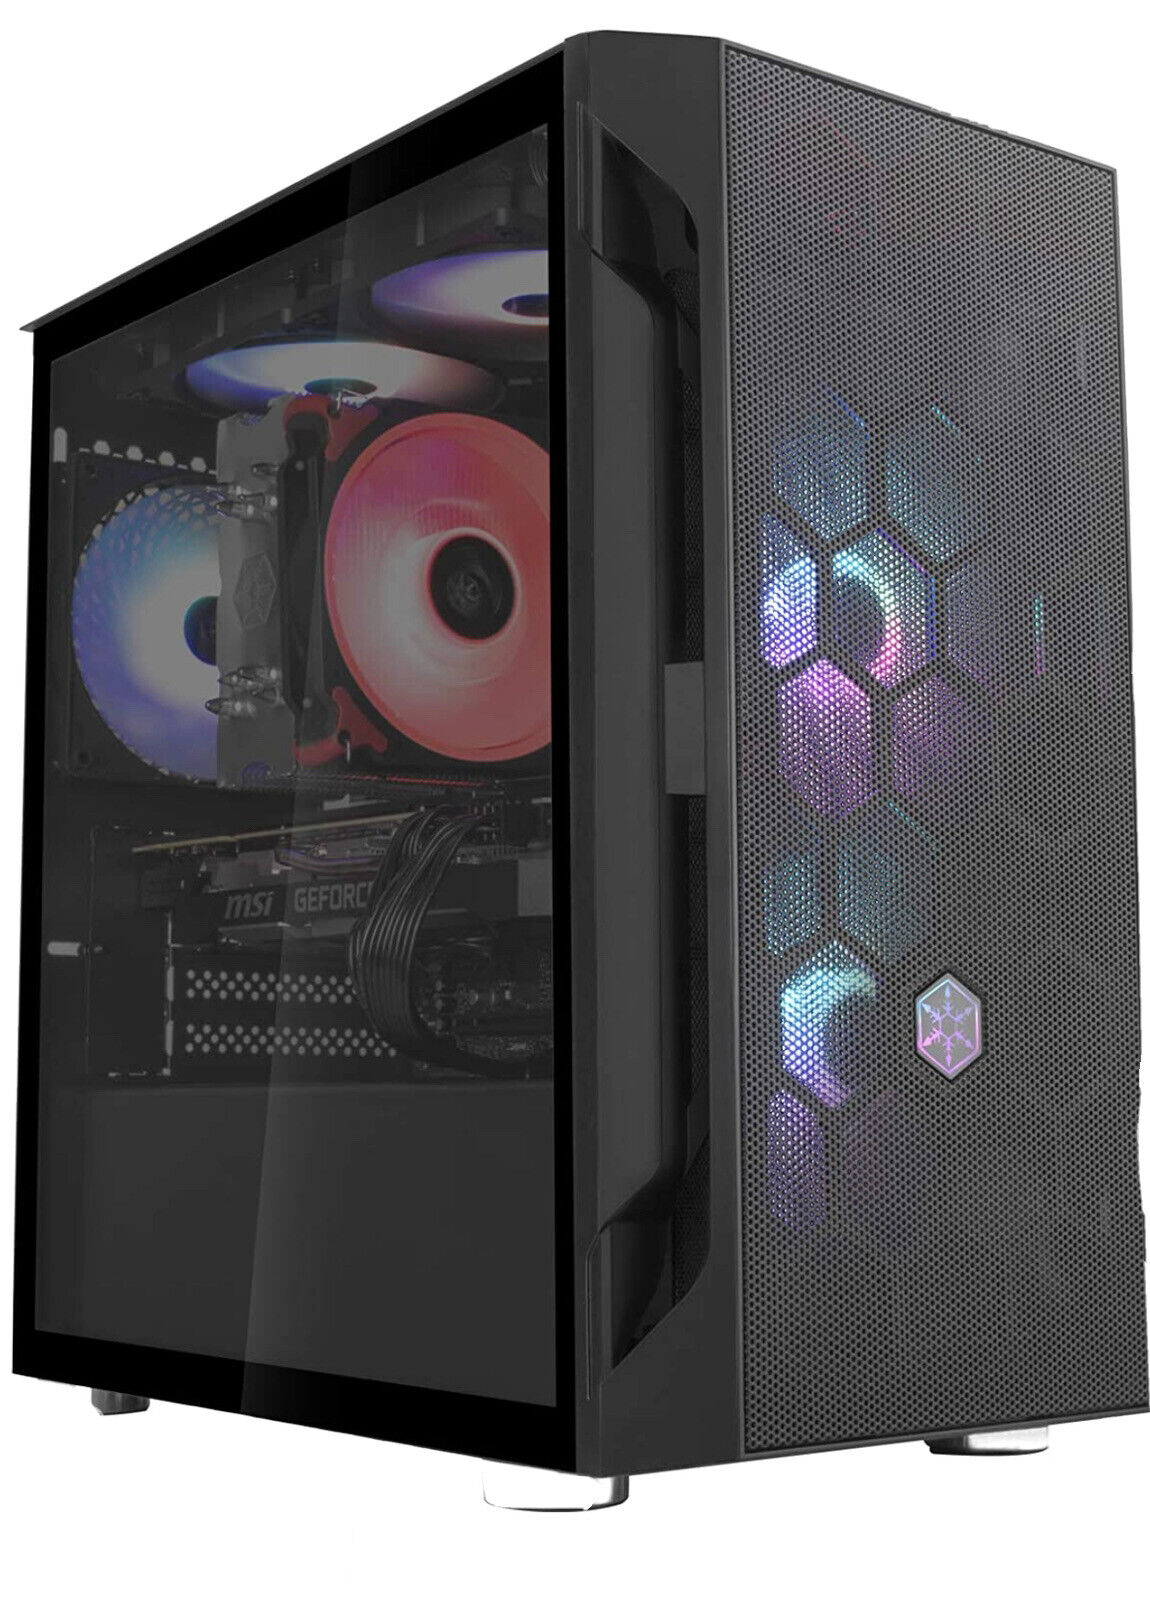 Cheap Customized Gaming Pc Look At Description Can Pick Your Own Ram And Storage